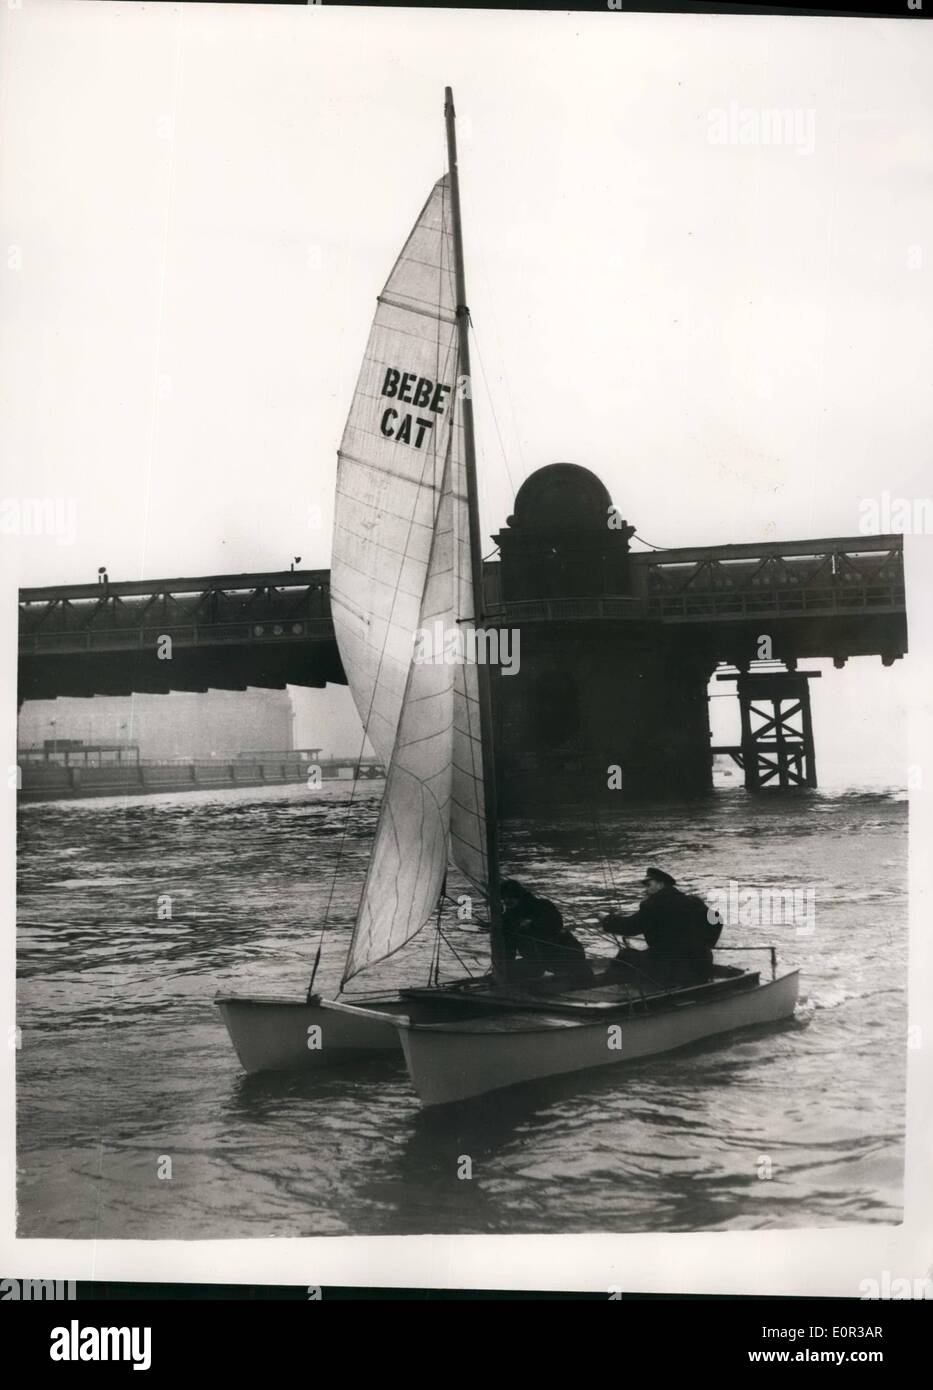 Jan. 01, 1958 - A Catamaran goes sailing on the River Thames, New ''Make it yourself'' craft demonstrated; A special type of Catarman a twin hulled Yacht - was to be seen sailing on the River Thames - after paying been ''launched'' by Lord Brabason of Tare from the Festival Hall pier this morning. The craft named ''Bebe cat' was soiled by its signer Captain Trick Manners and Miss Pamela Dugdale who has sailed many many miles in small boats. Photo Shows The Catamaran on the Thames showing the ''The hungerford Brides in background - this morning Stock Photo